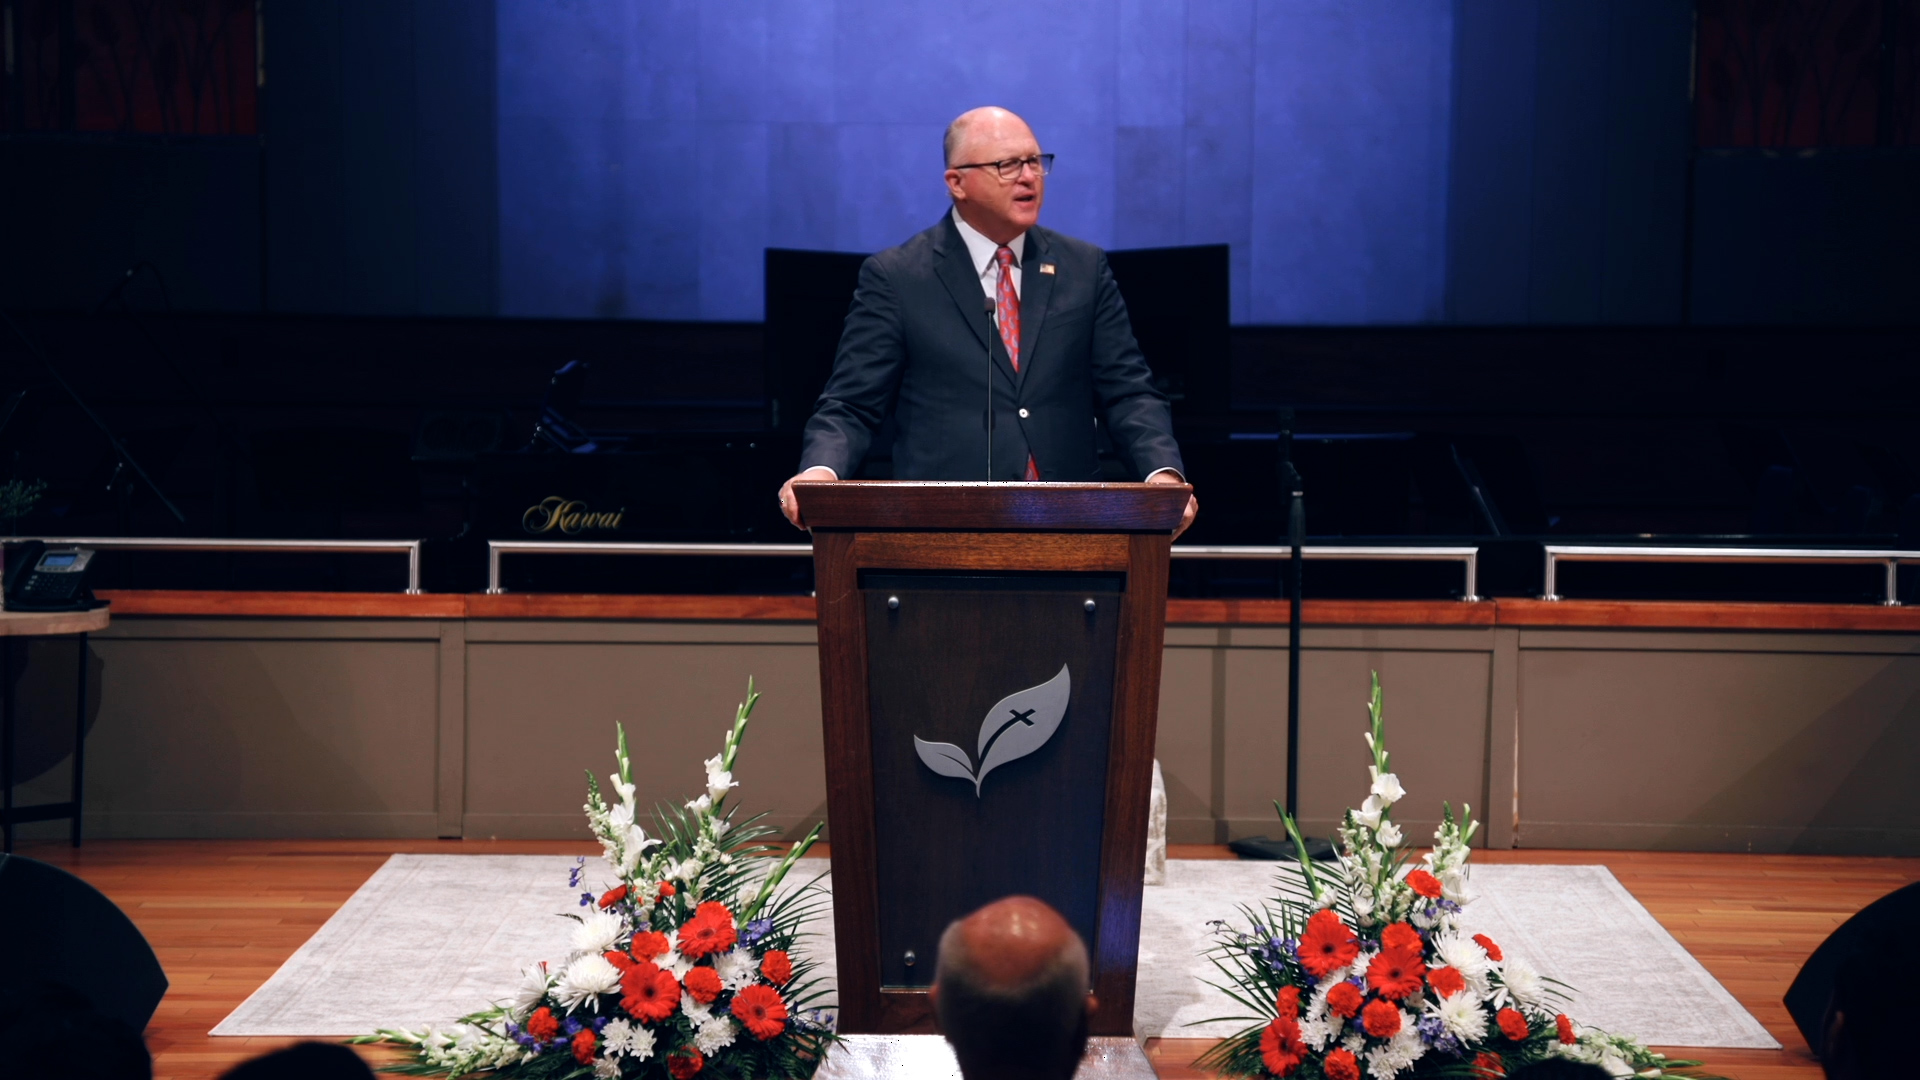 Pastor Paul Chappell: Courageous In Suffering